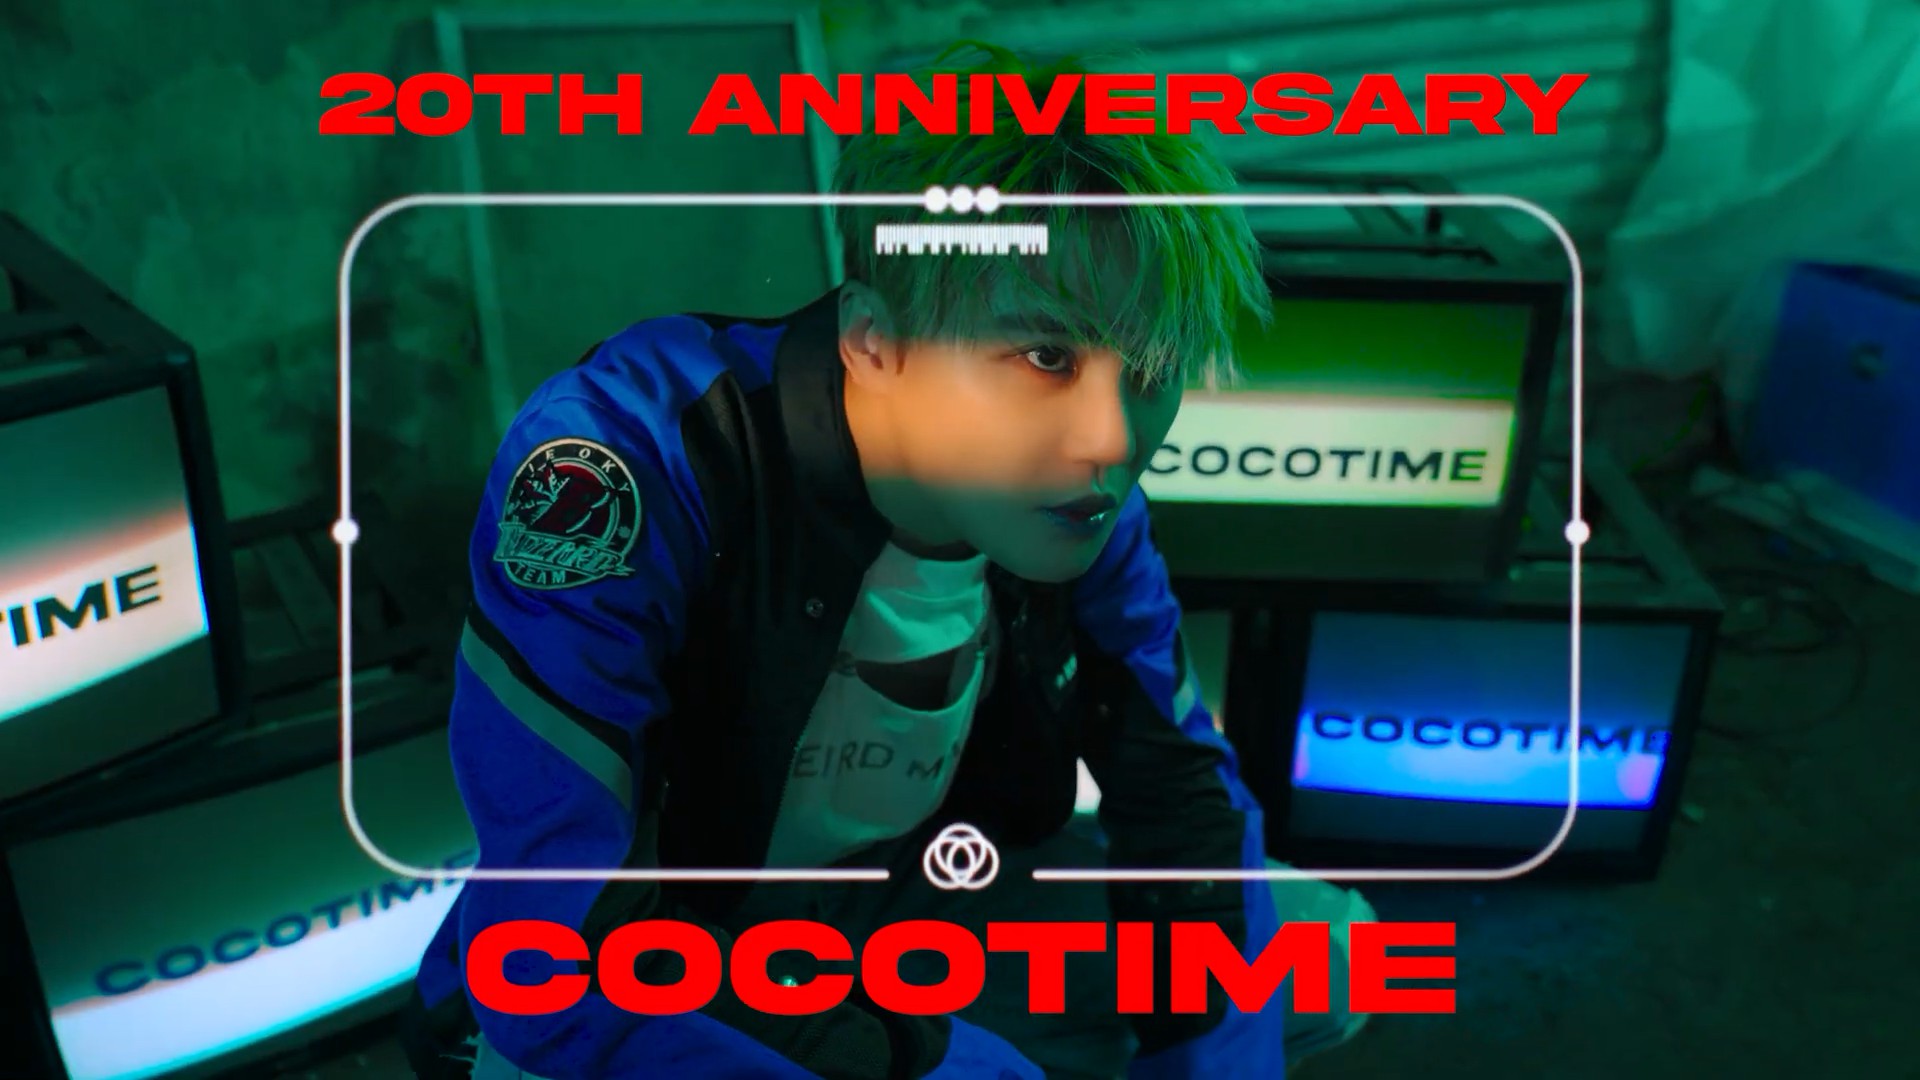 XIA l COCOTIME OPENING VCR22.jpg